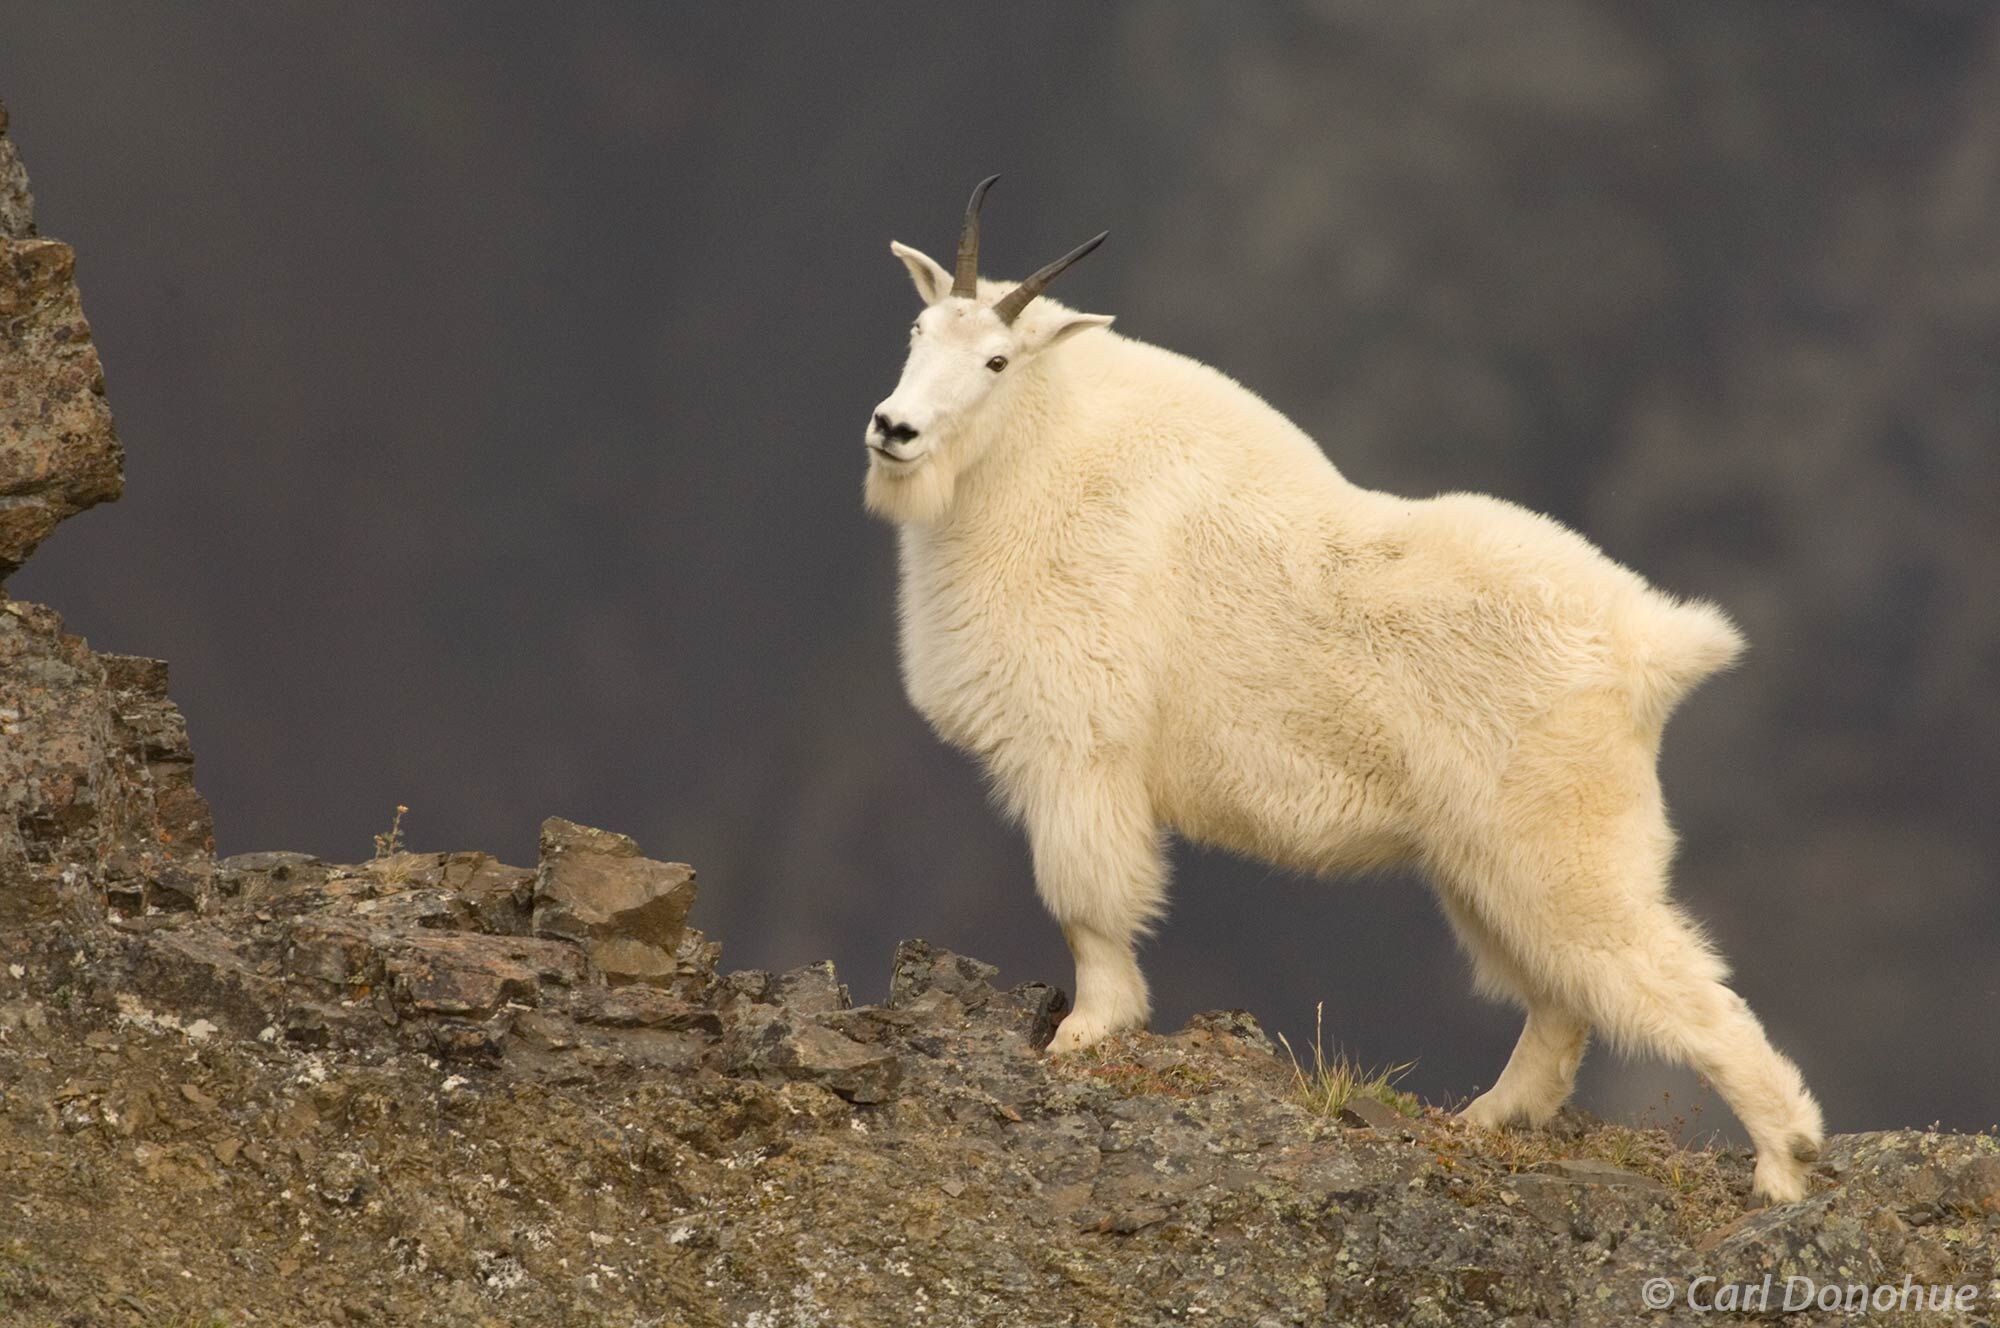 The resilient mountain goat thrives in the harsh conditions of Wrangell-St. Elias National Park, Alaska. Mountain goat, Wrangell...